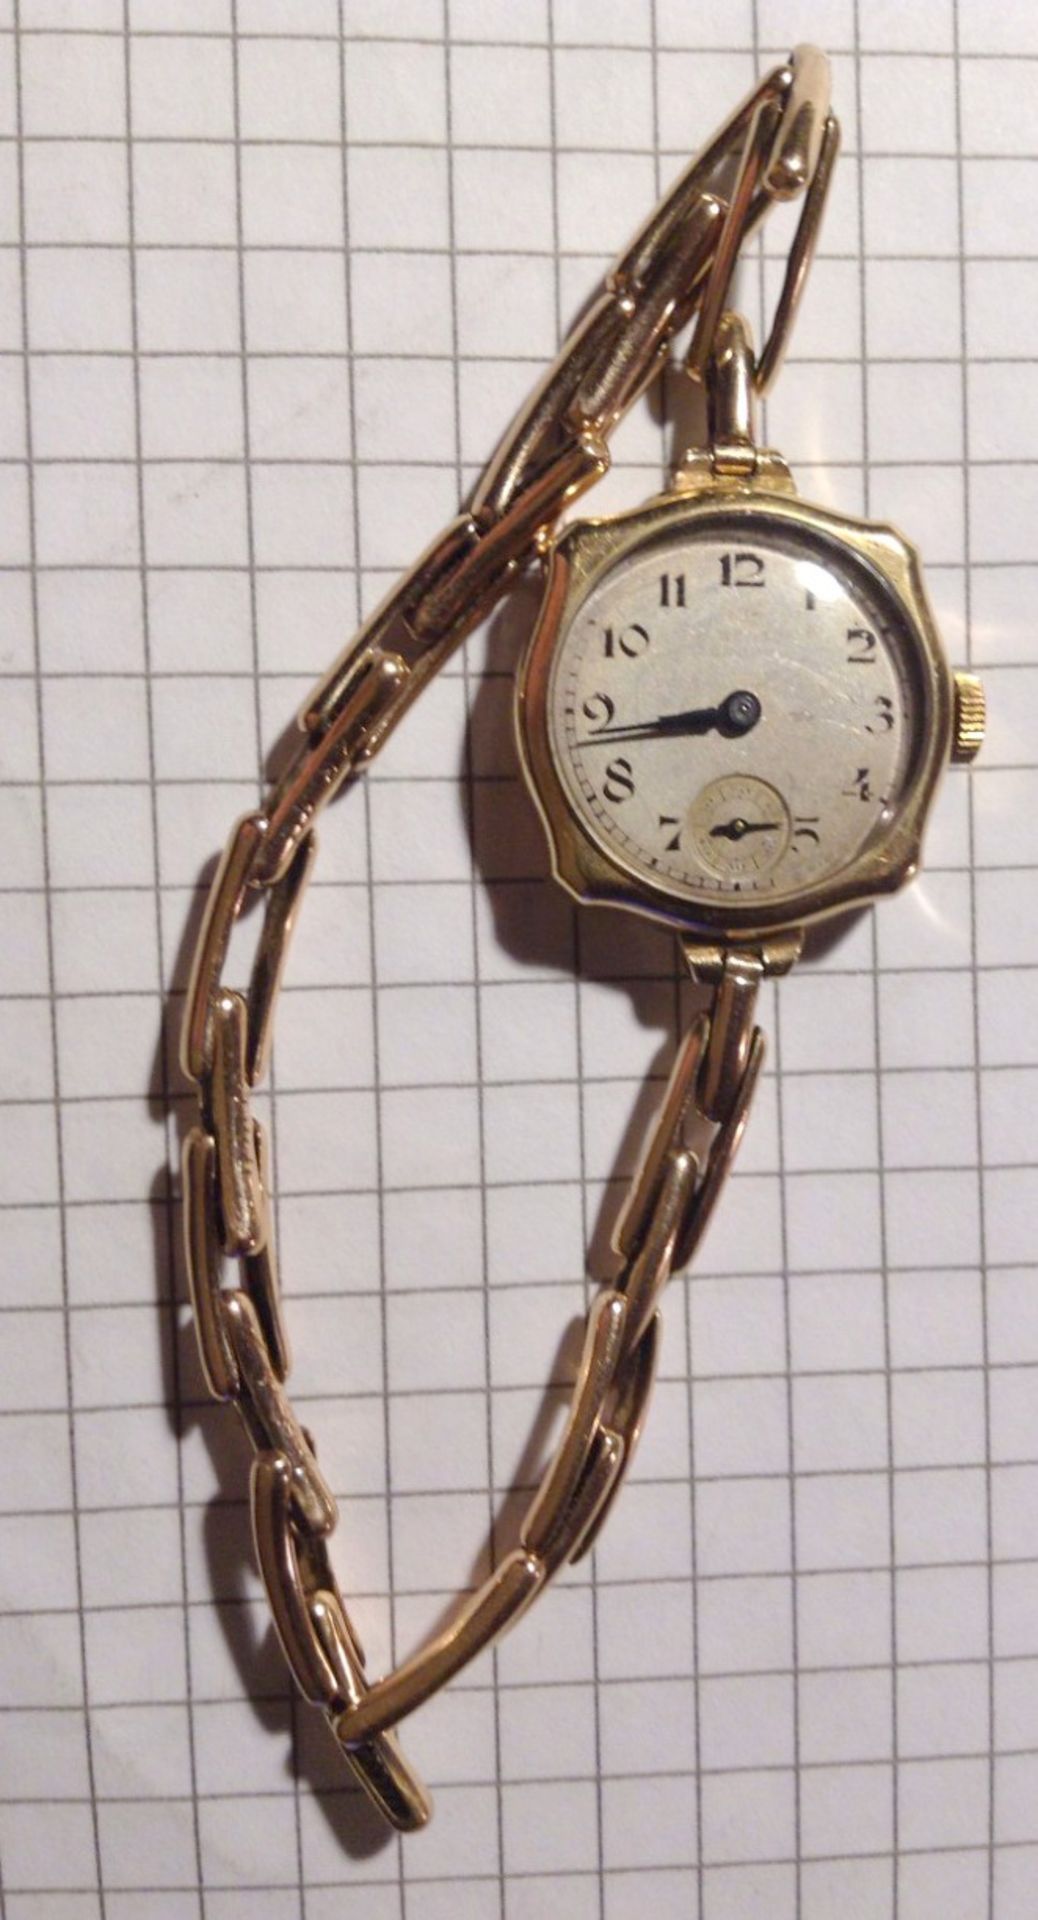 1936/37 Lady's 9ct Gold Watch On Expanding Bracelet Possibly JW Bensons of London - Image 2 of 6